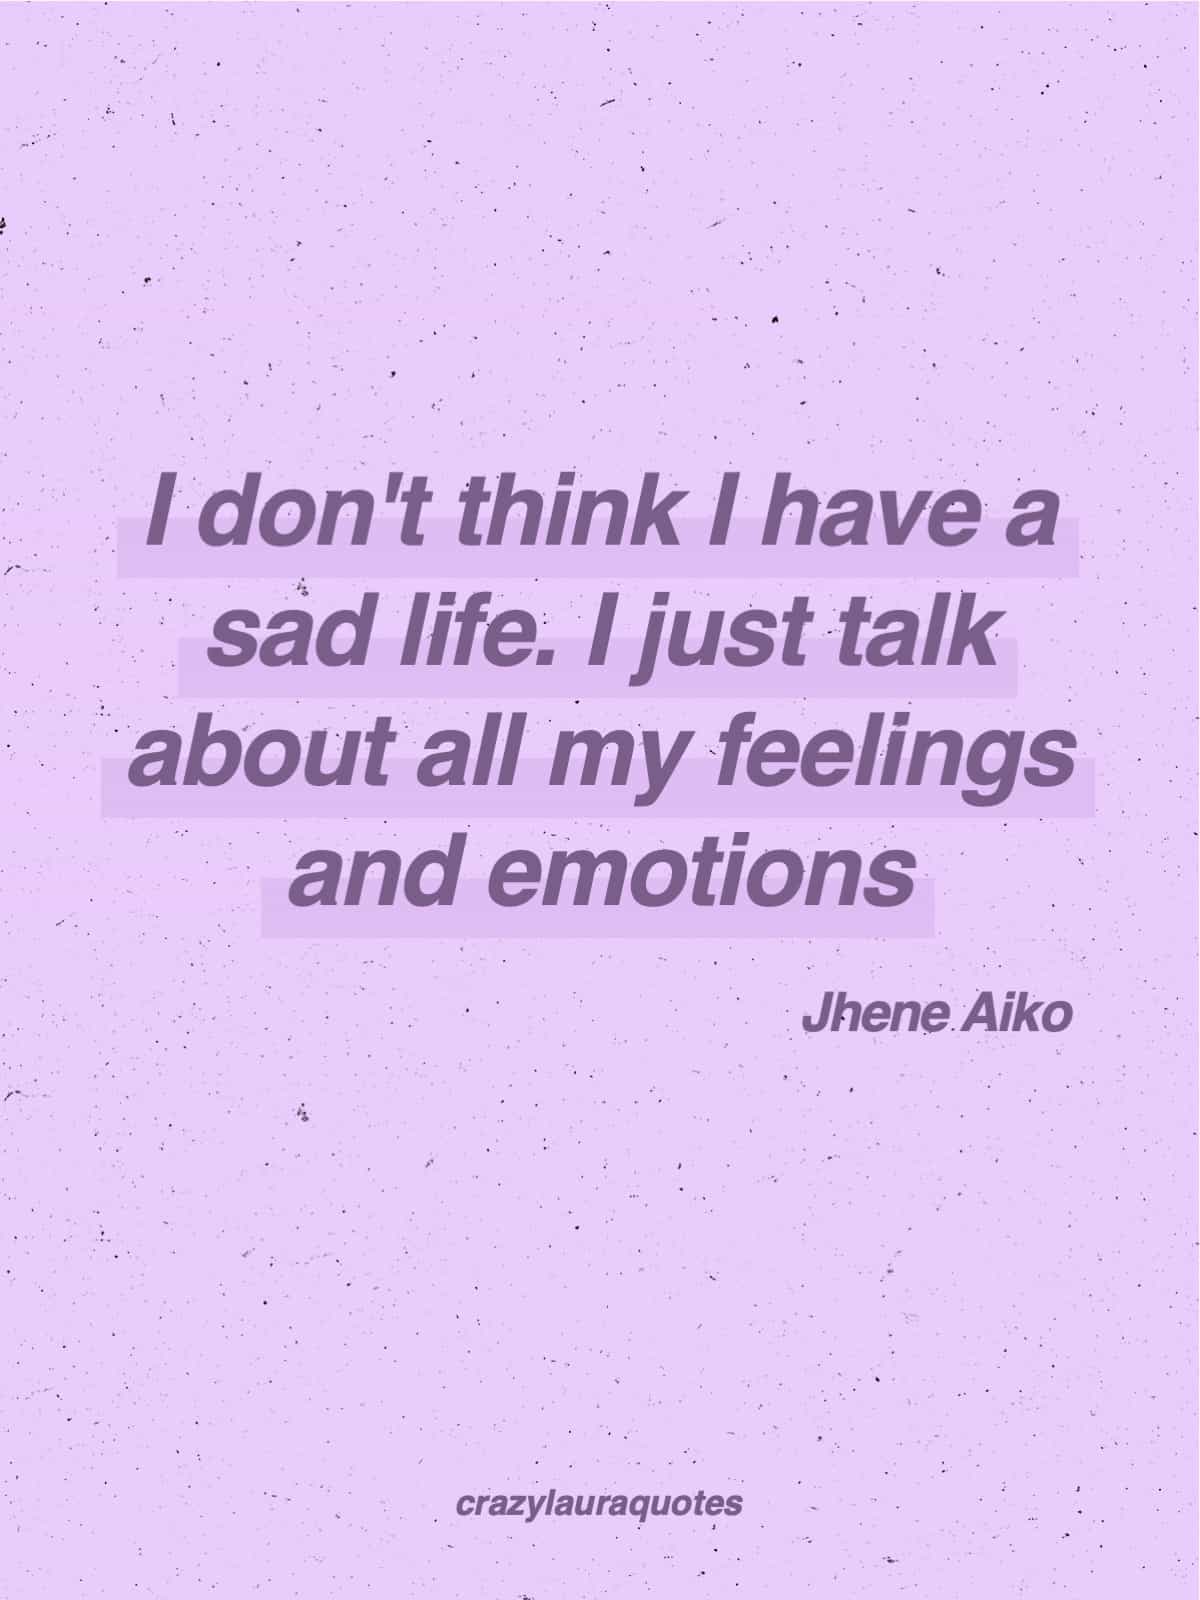 talk about feelings in life quote